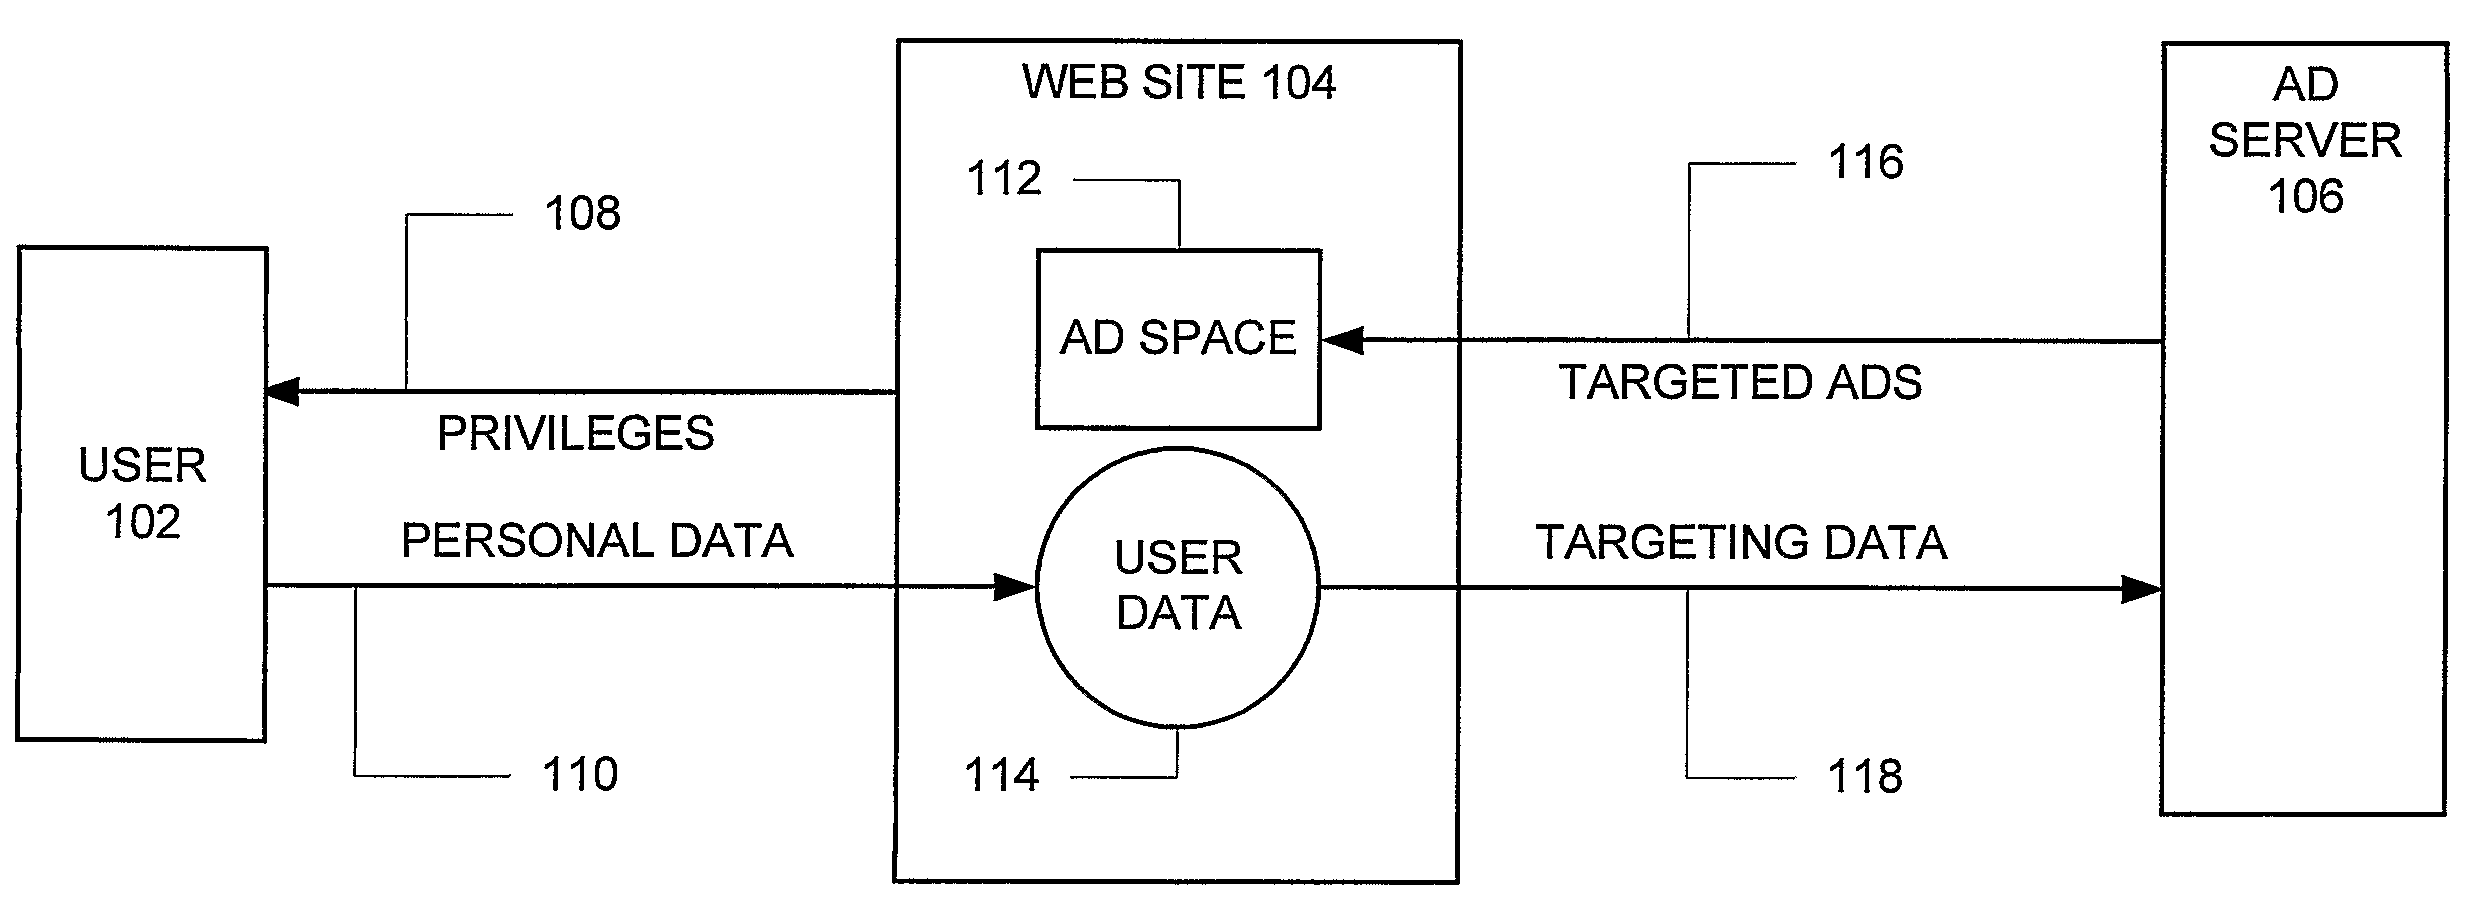 System and method for the reversible leasing of anonymous user data in exchange for personalized content including targeted advertisements